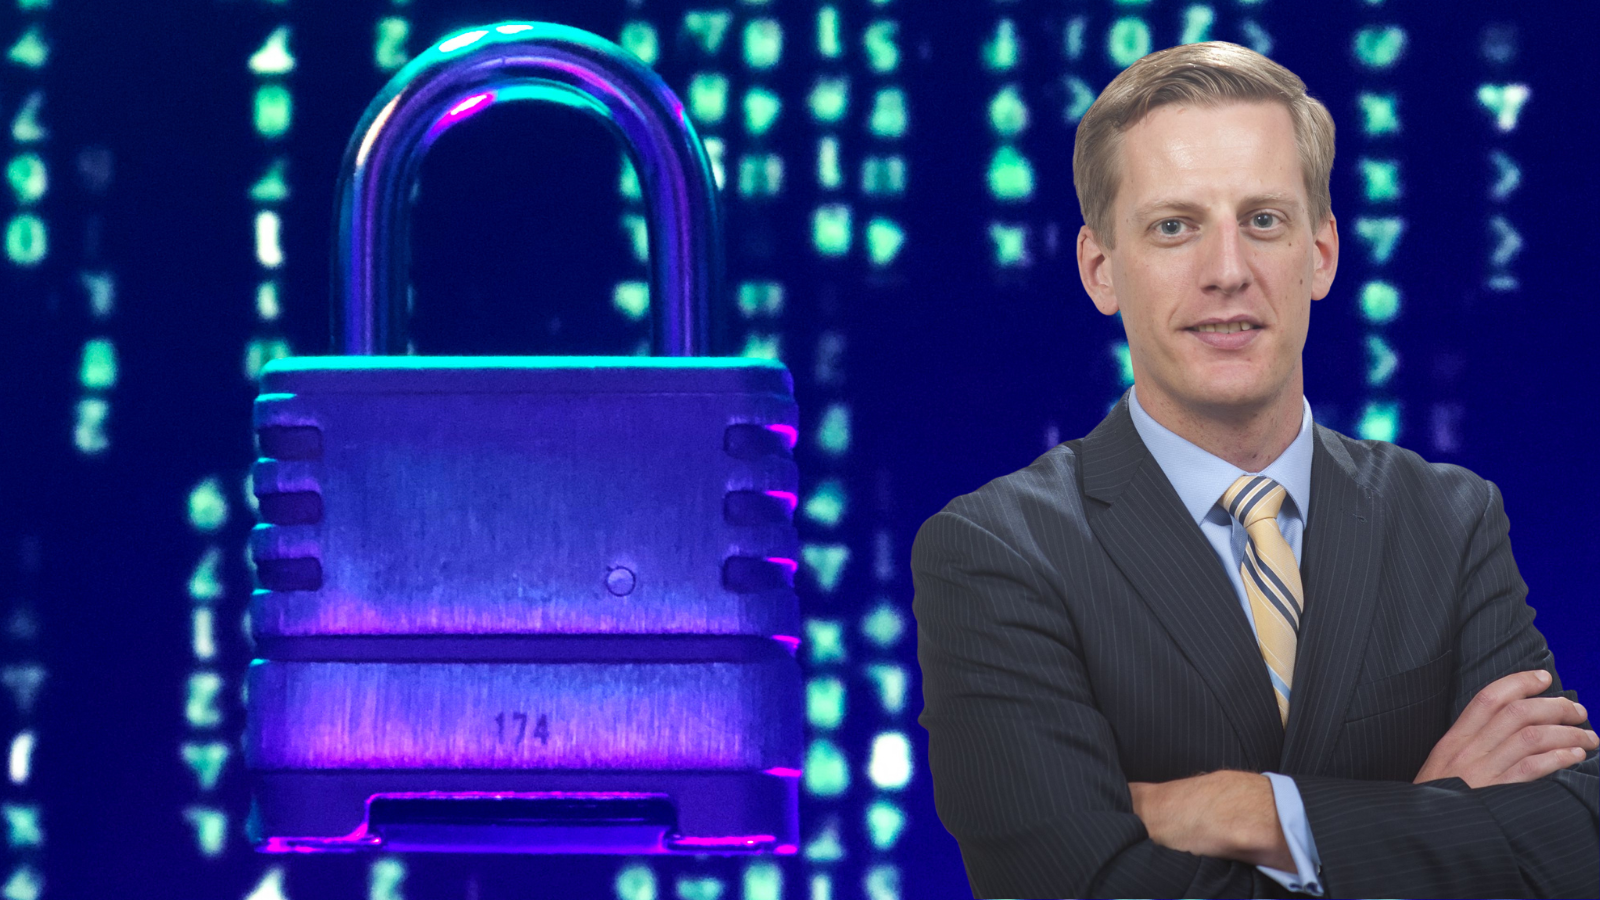 SideChannel's CEO Brian Haugli in front of a blue, purple, and green background with a large padlock to the left